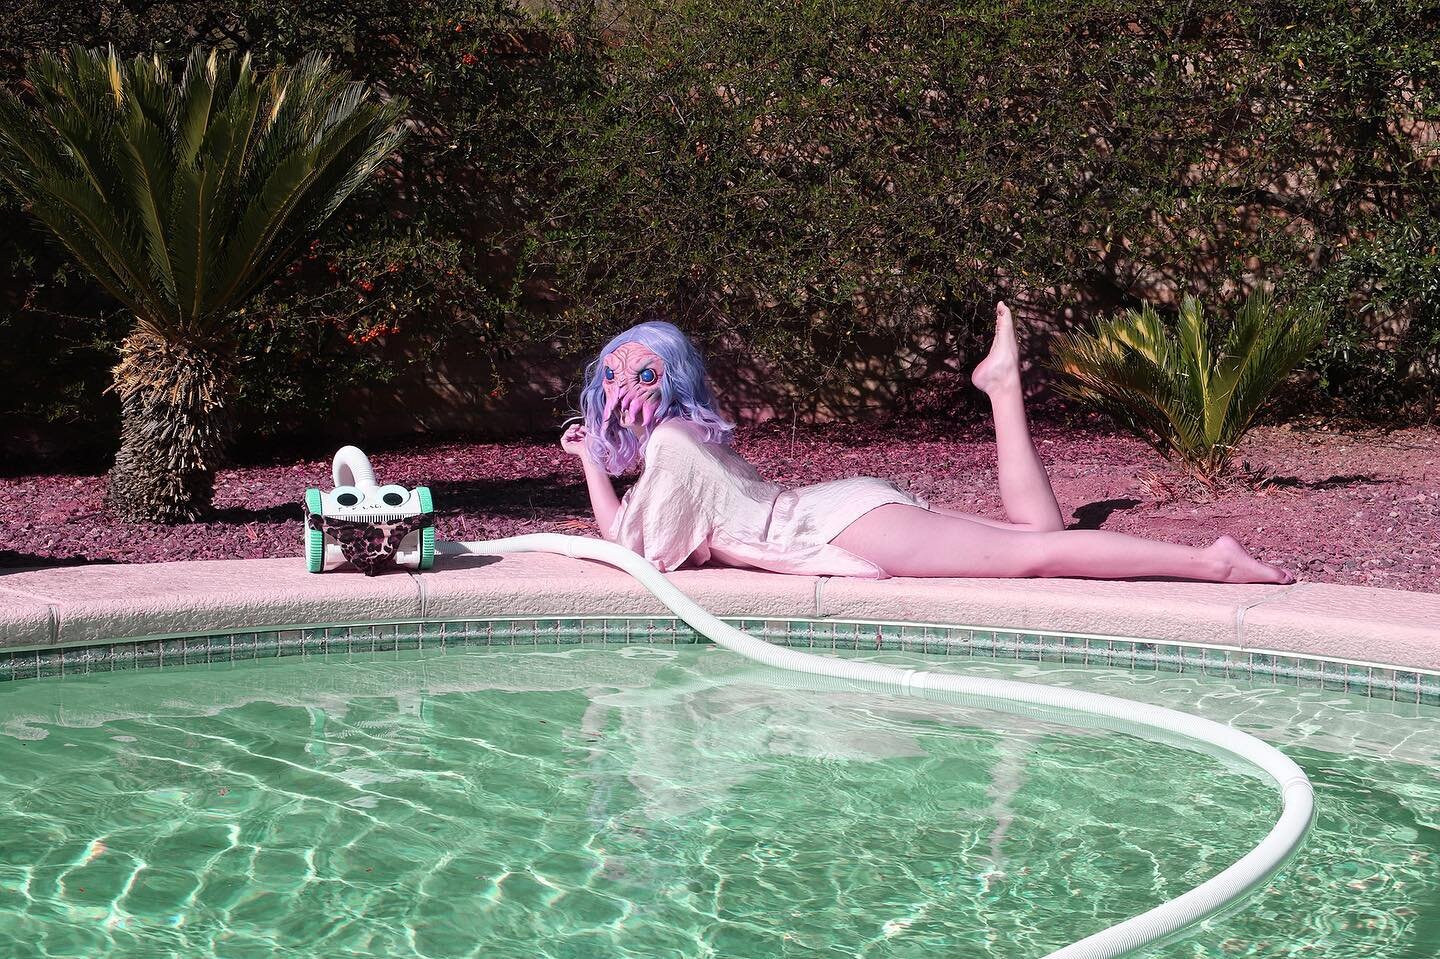 Realizing I never shared this gem of a photo!  From a series I started this year, titled Baddies 💖
.
.
.
Lauren (Chatting with the Pool Boy)🌊🌴
.
.
.
Special thanks to my lil monster @lauren.c.steinert for doing this shoot in February 🥶💕
#digital